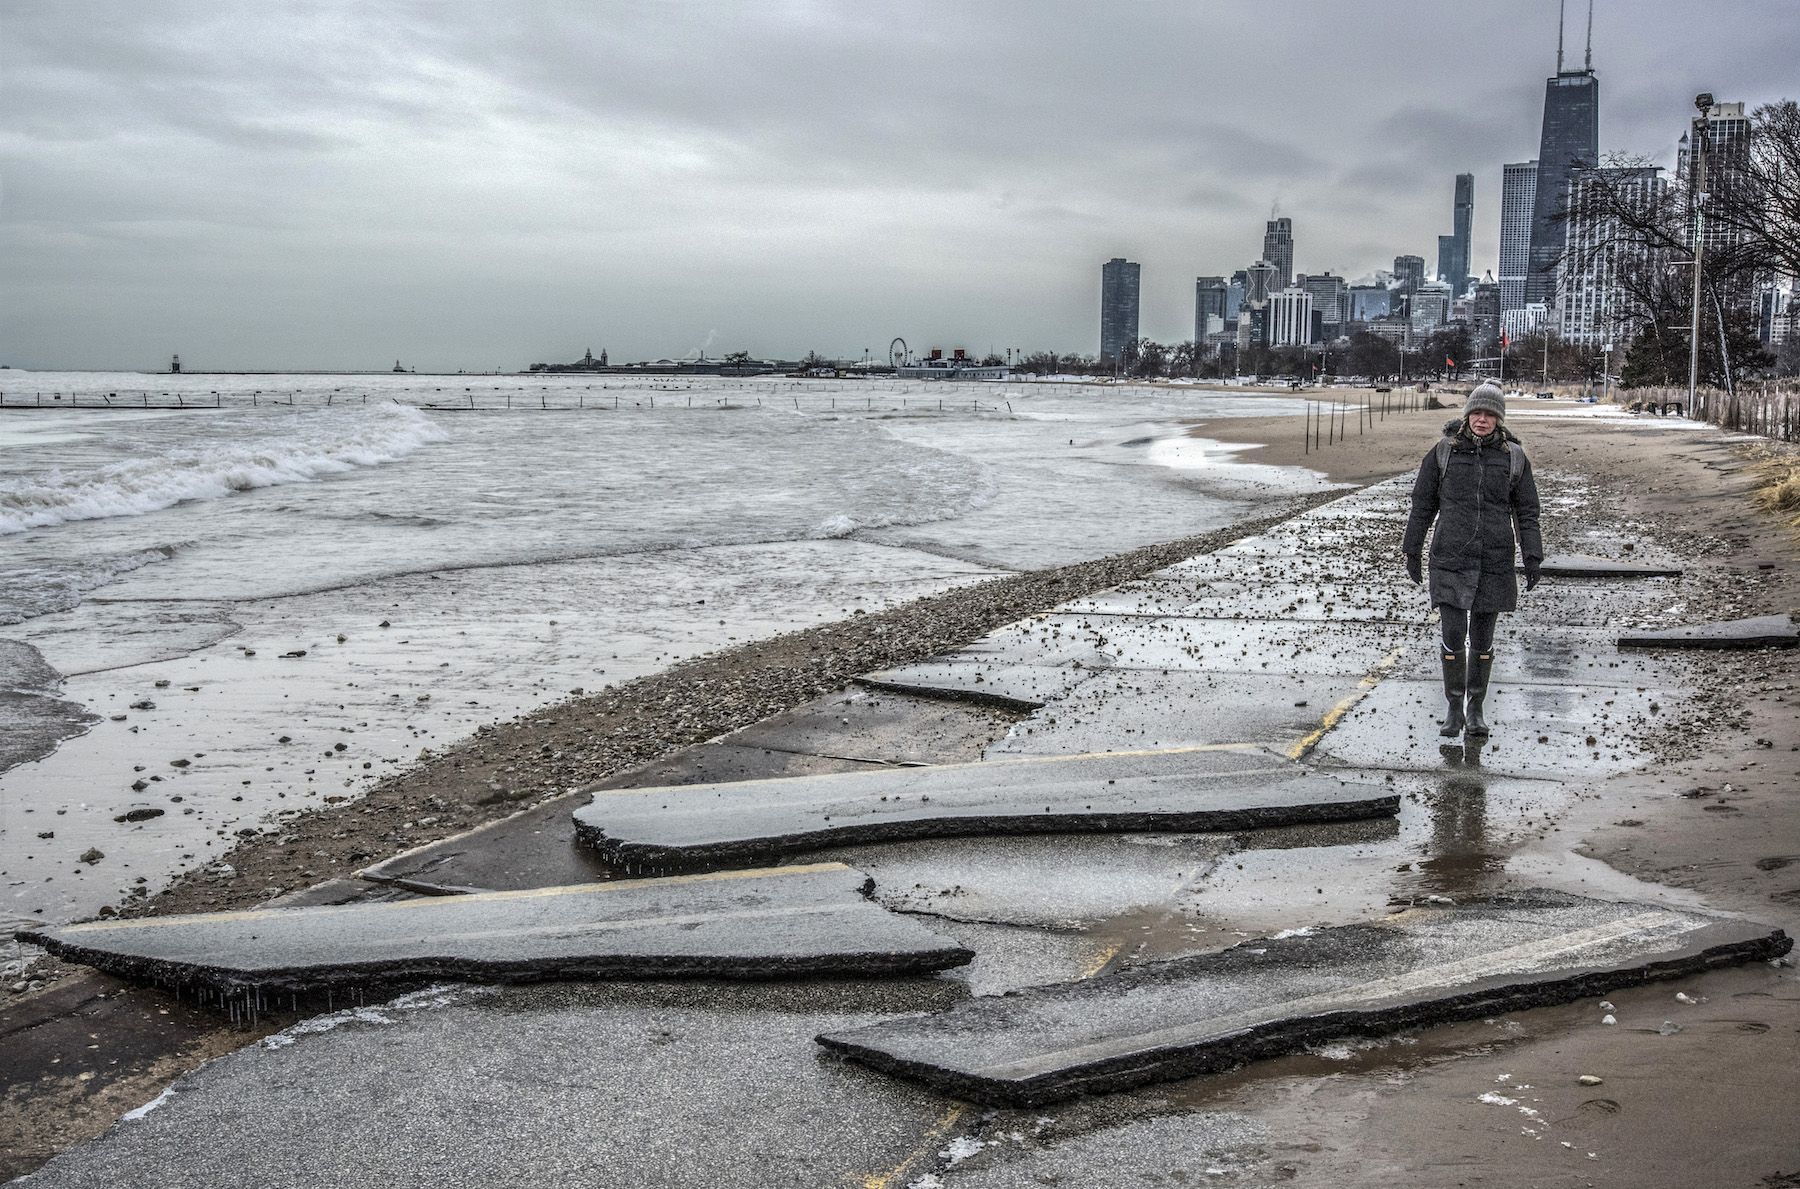 The Lakefront Trail near North Avenue in Chicago. Image by Lloyd DeGrane. United States, 2020.